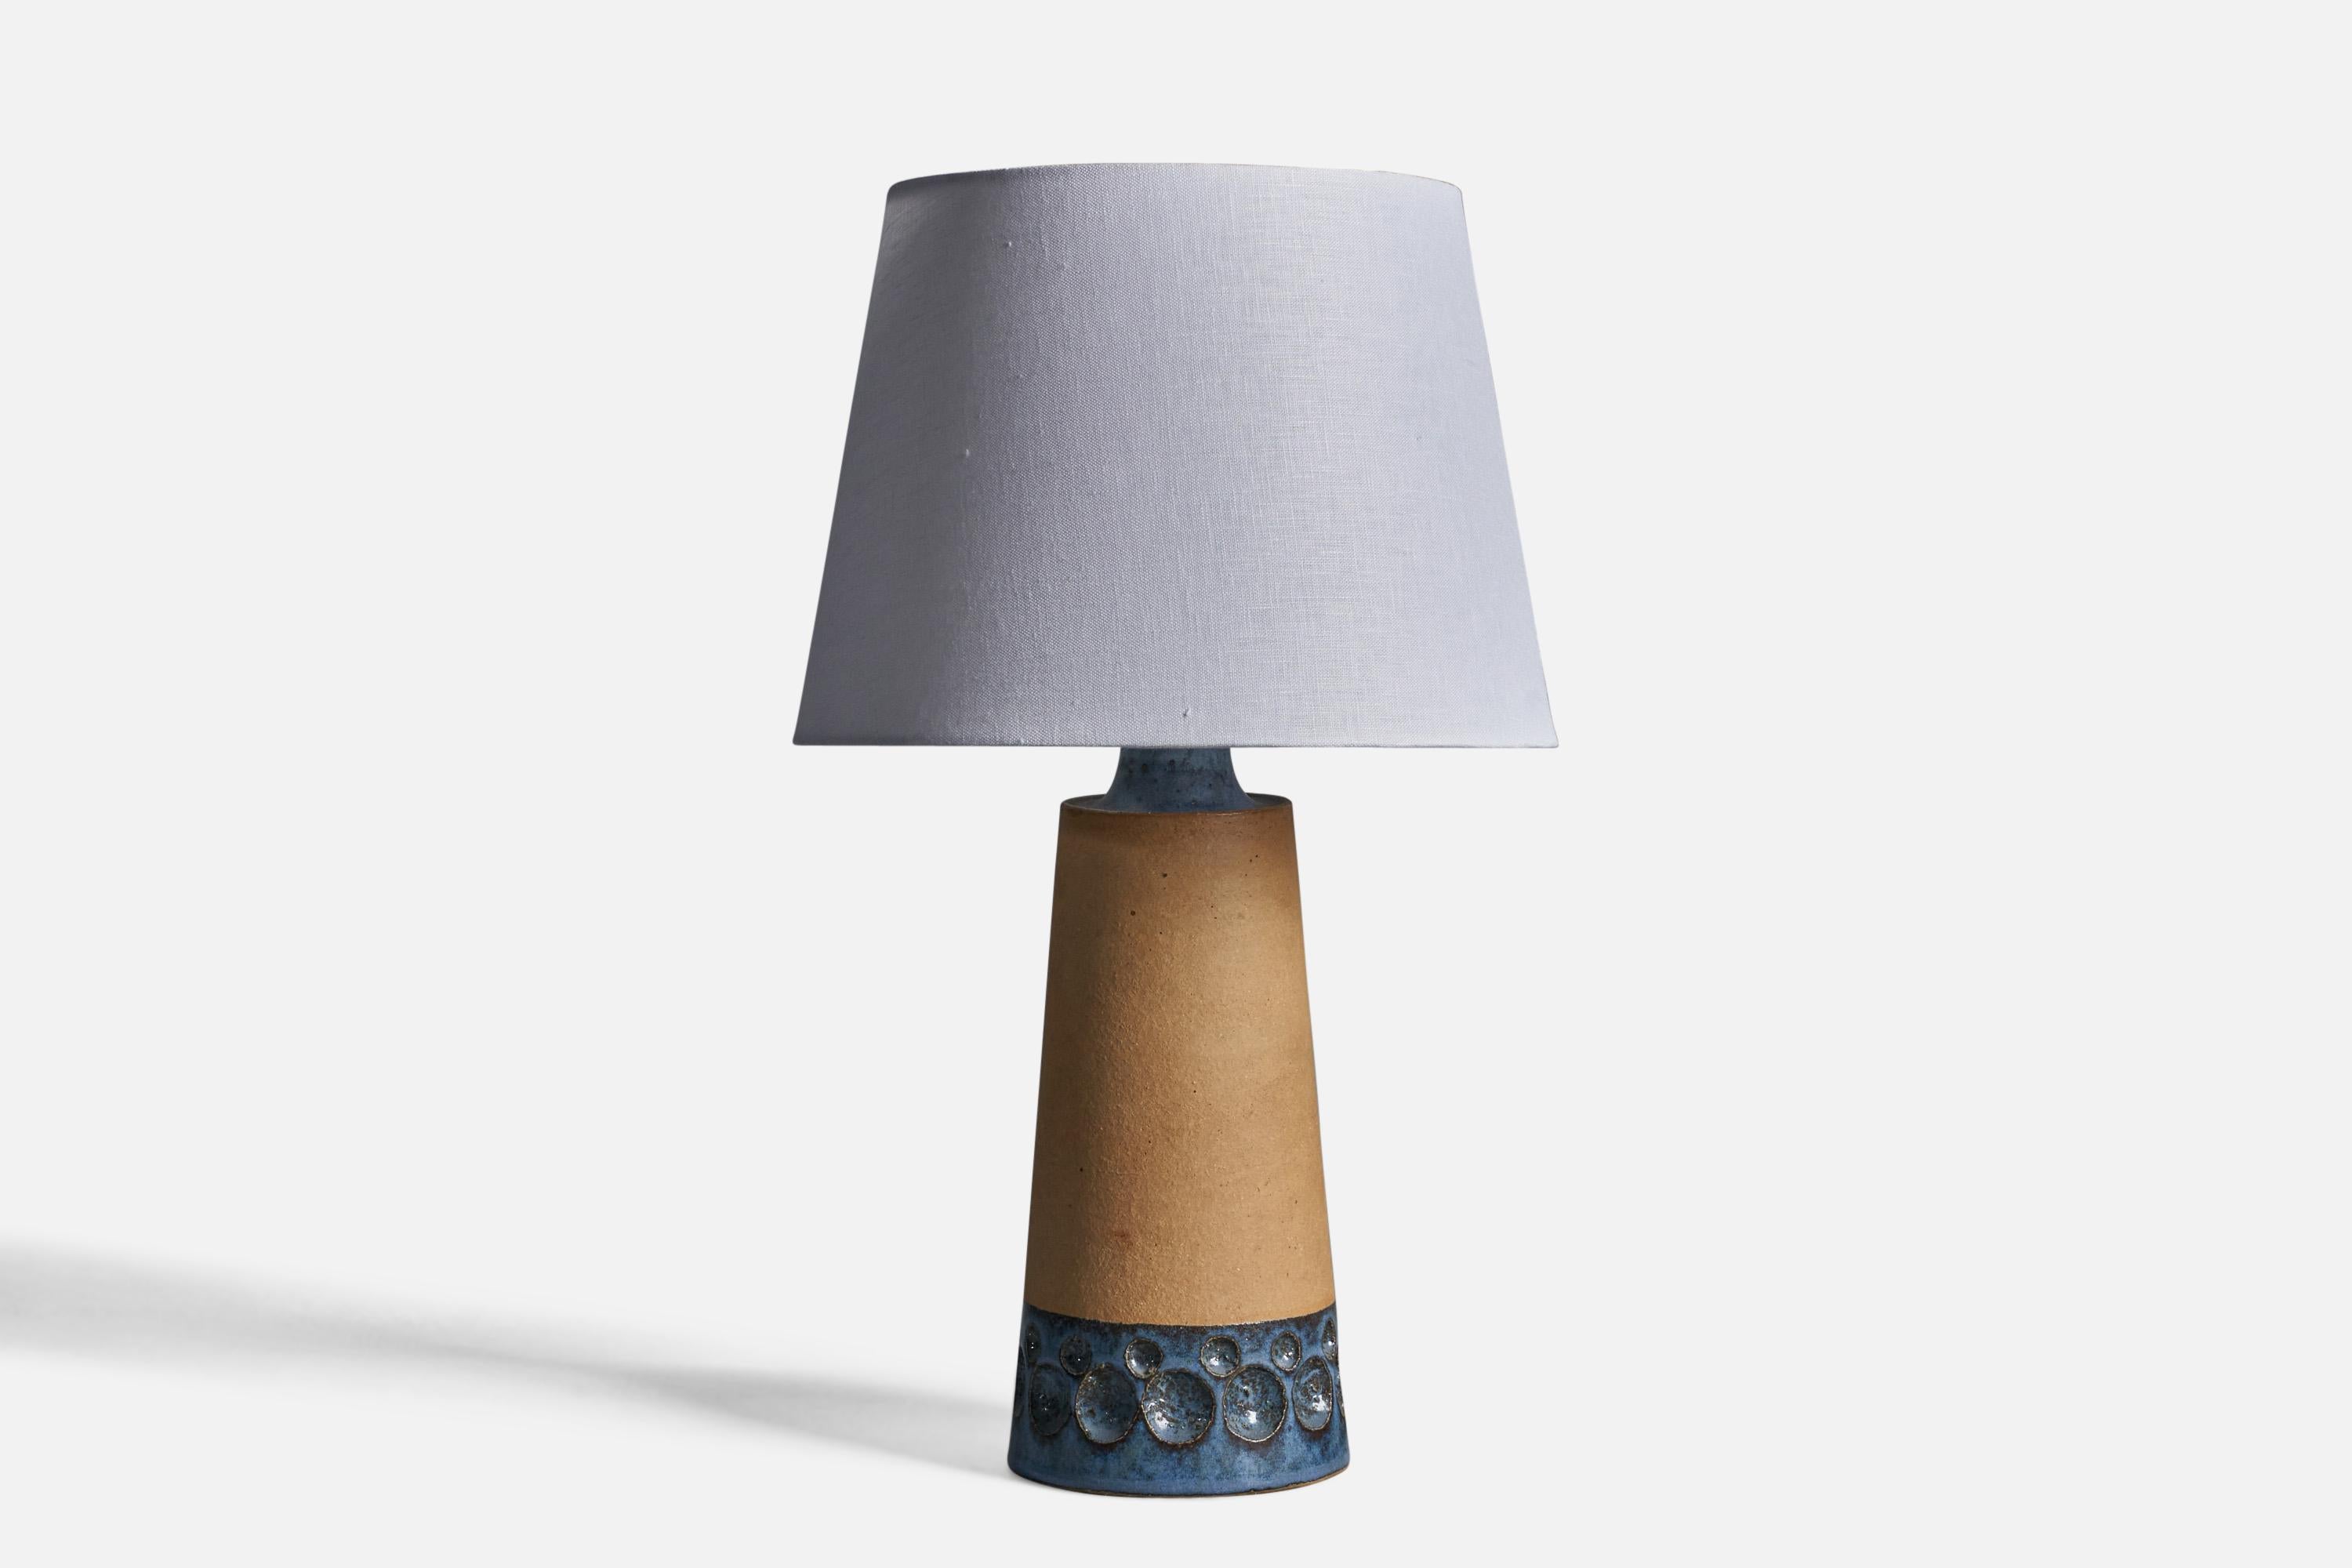 A semi-glazed blue and beige stoneware table lamp, designed and produced by Michael Andersen, Bornholm, Denmark, 1960s.

Dimensions of Lamp (inches): 15.5